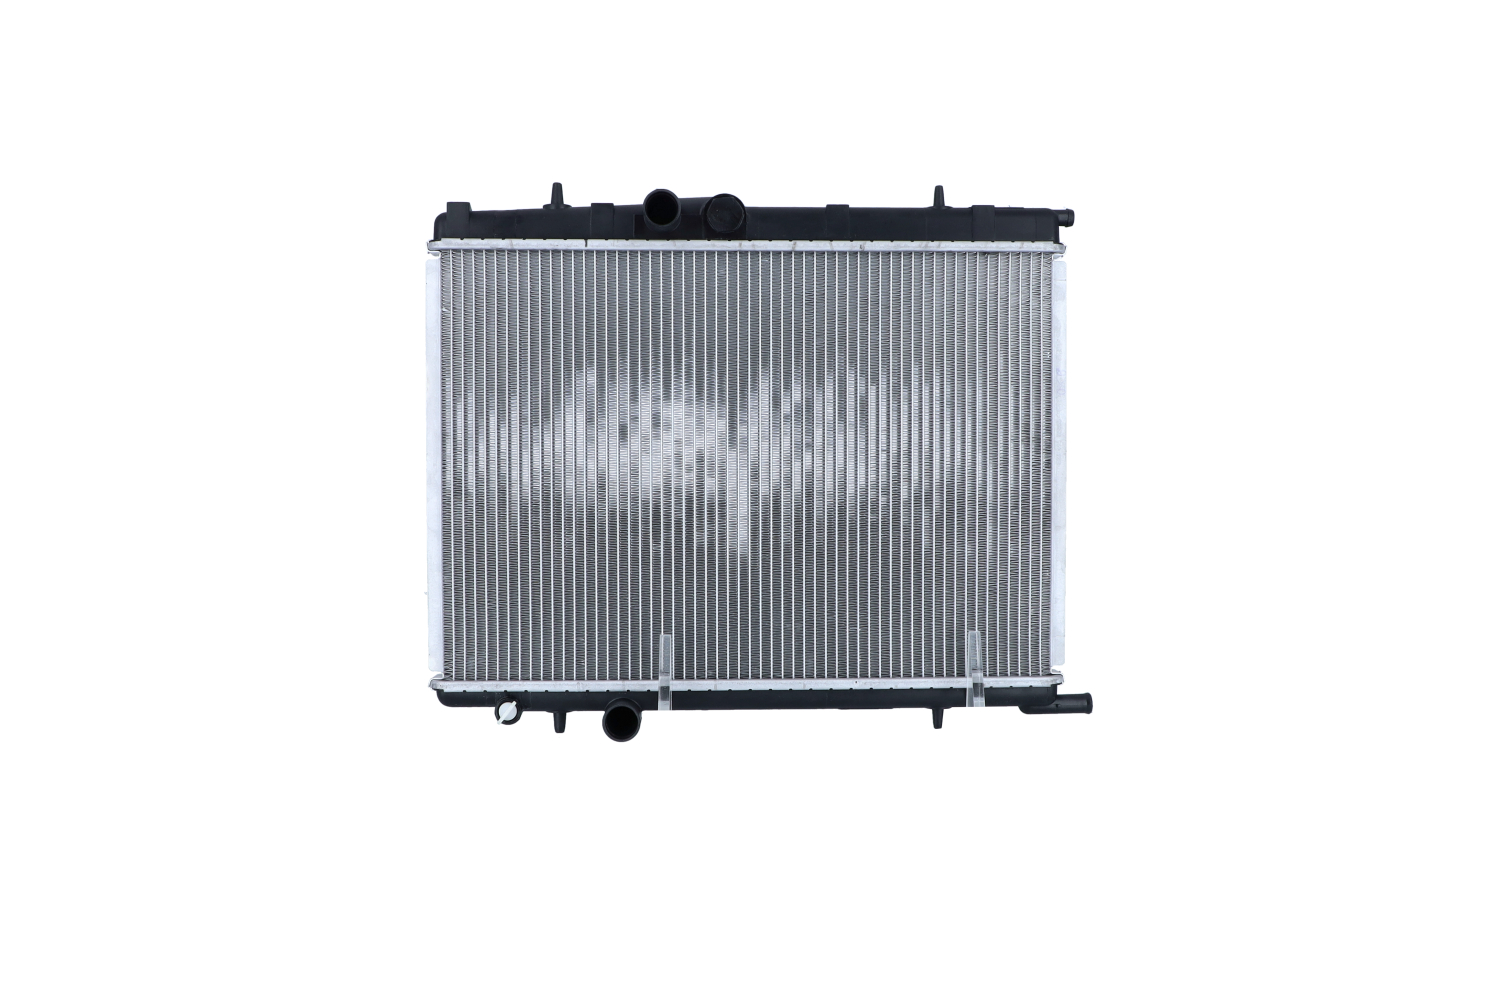 NRF 56021 Engine radiator Aluminium, 555 x 380 x 29 mm, with mounting parts, Brazed cooling fins